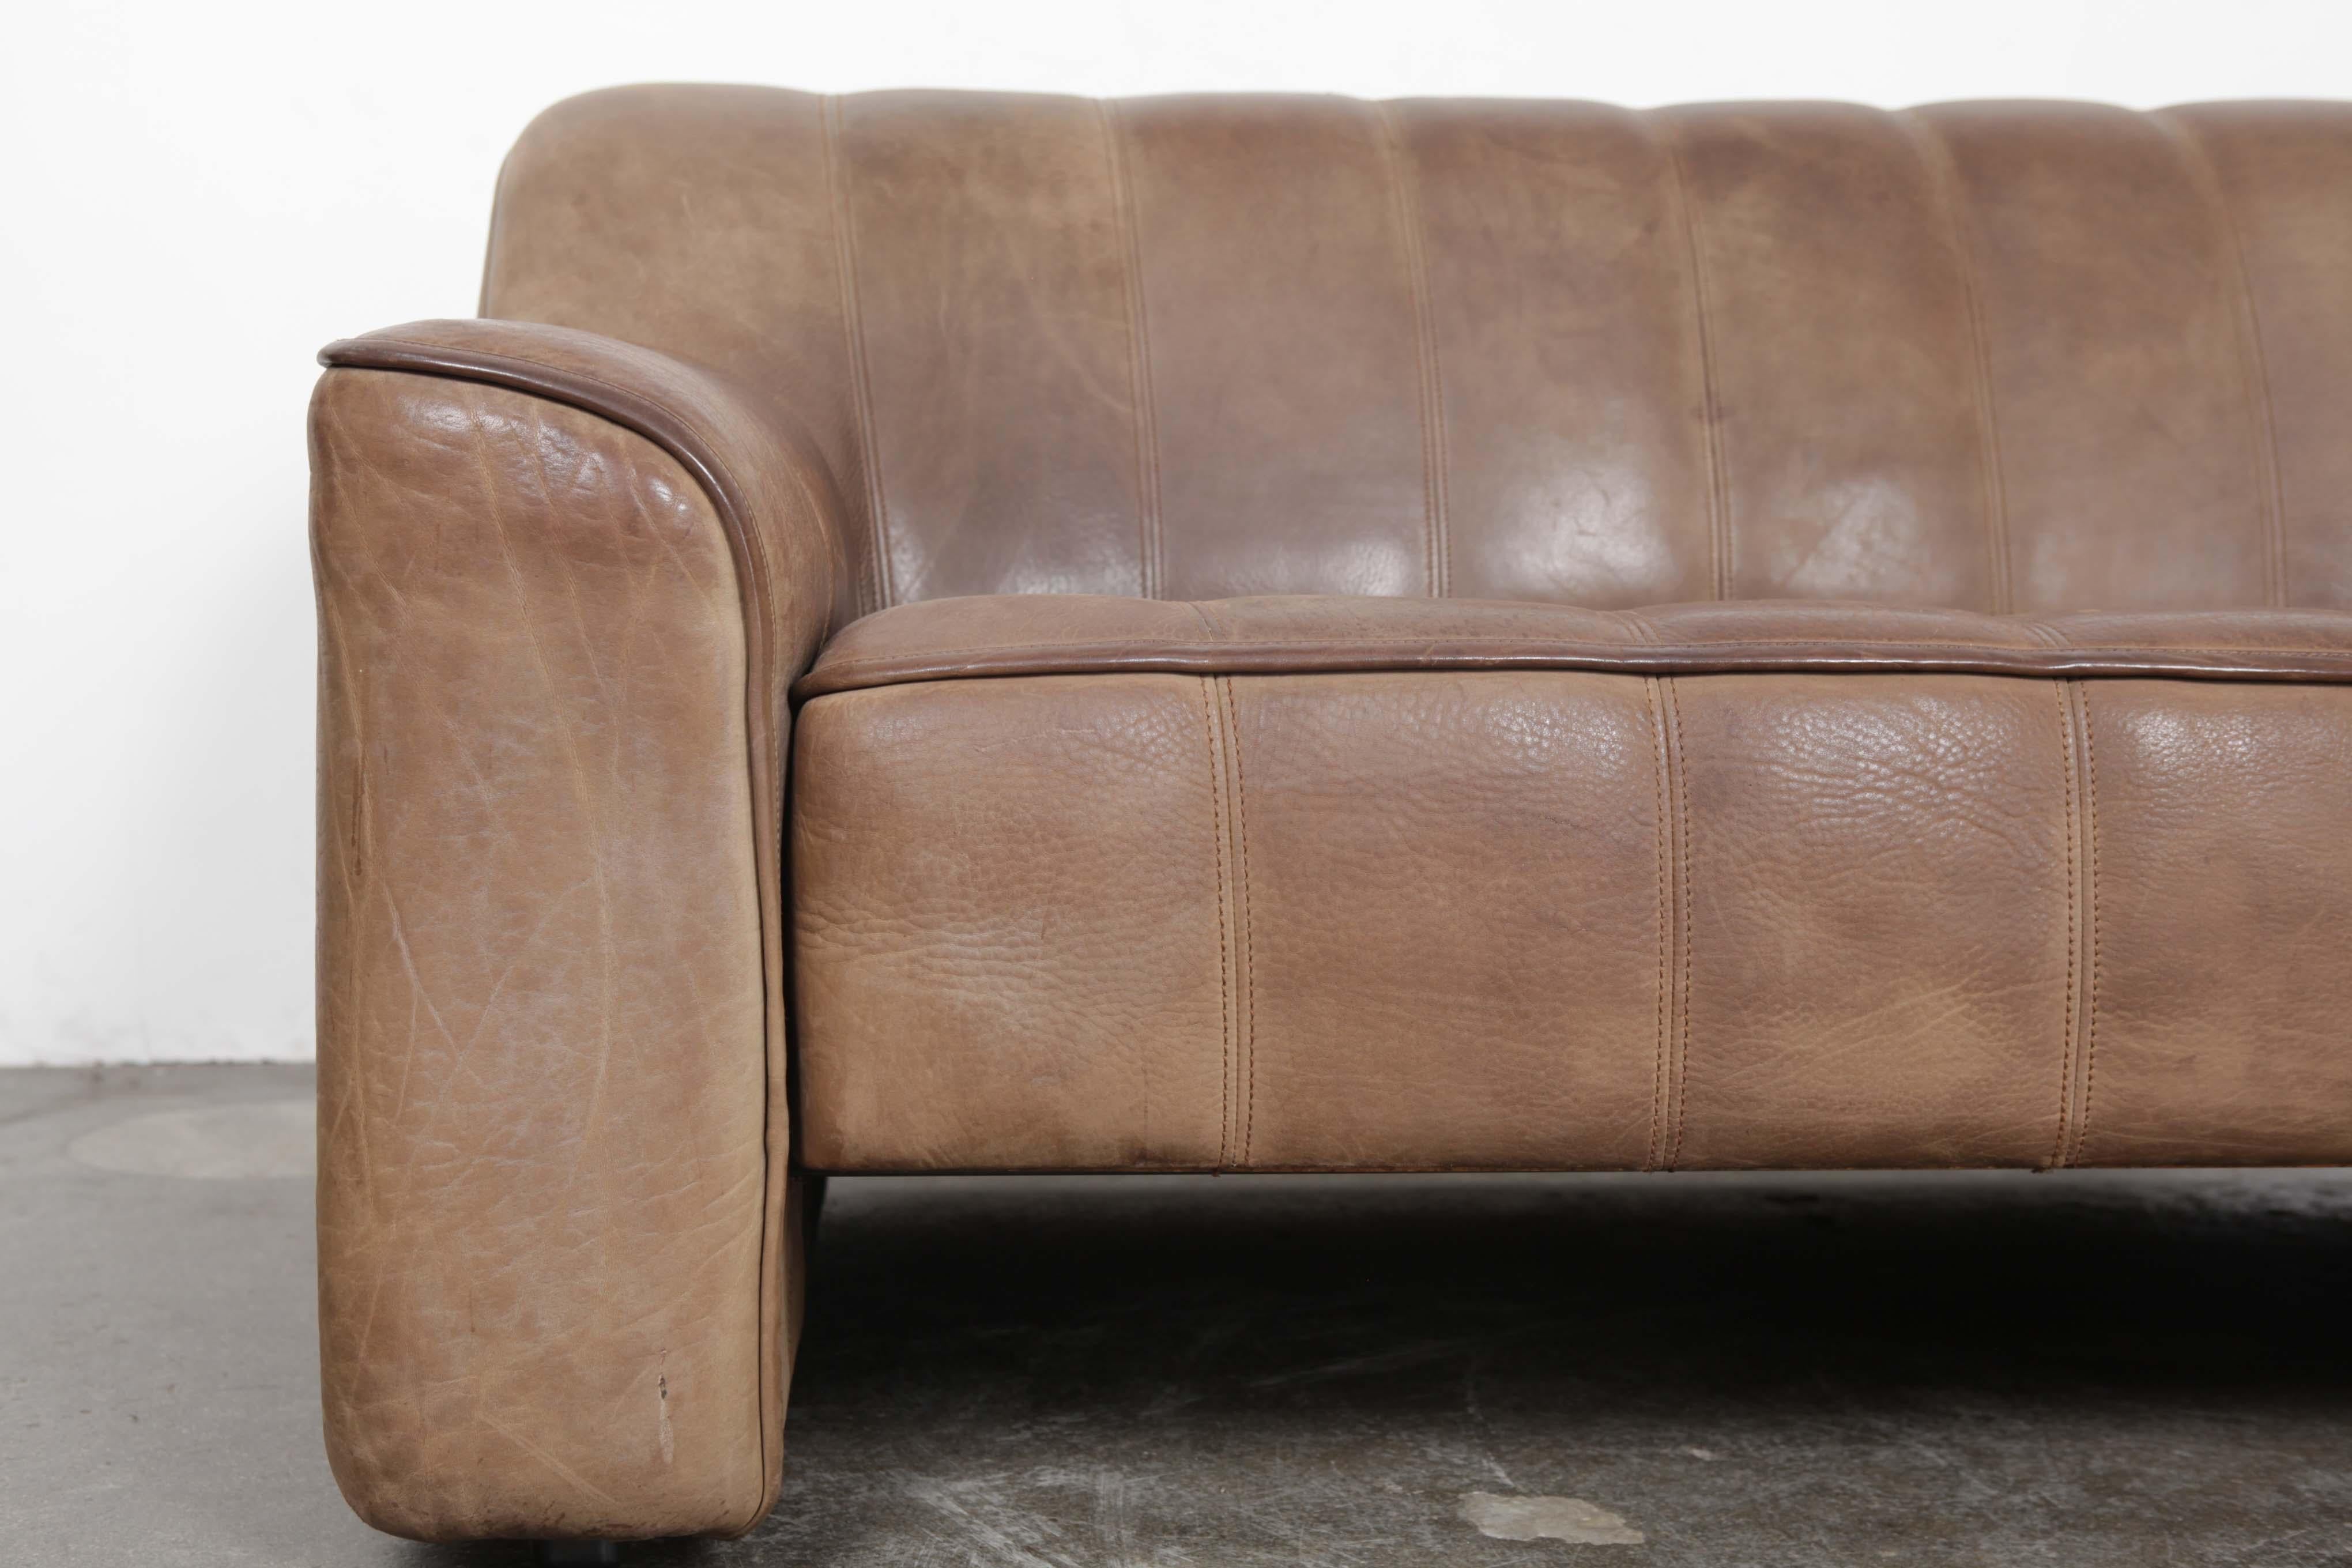 De Sede DS 44 2-Seat Sofa in Buffalo Leather, Switzerland, 1970s For Sale 5